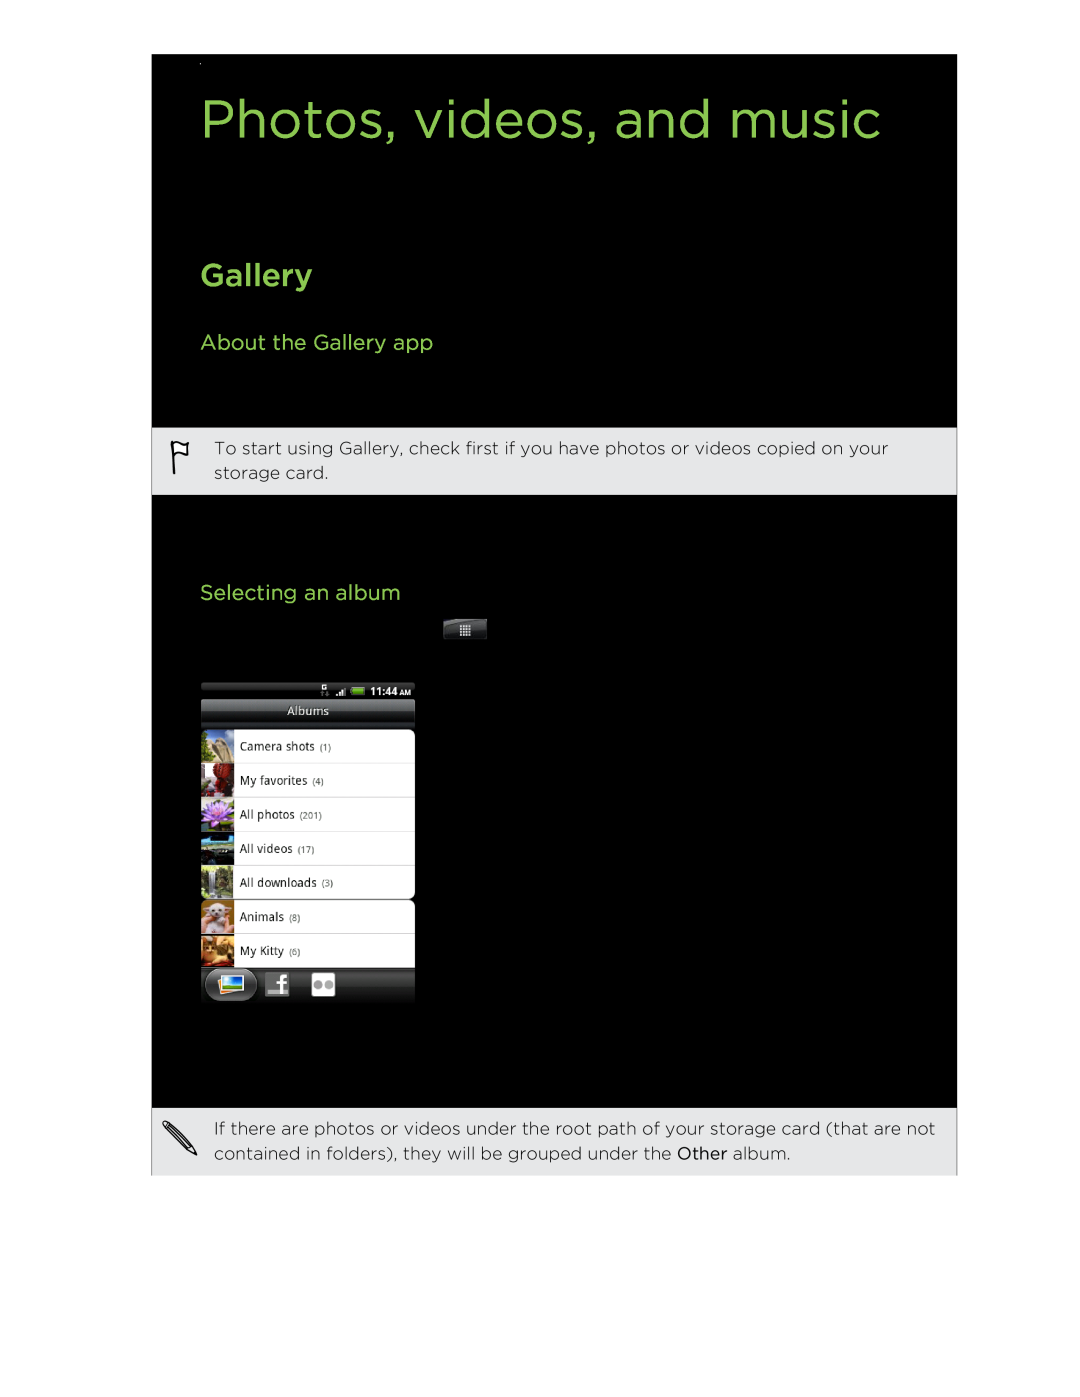 HTC manual Photos, videos, and music, About the Gallery app, Selecting an album 